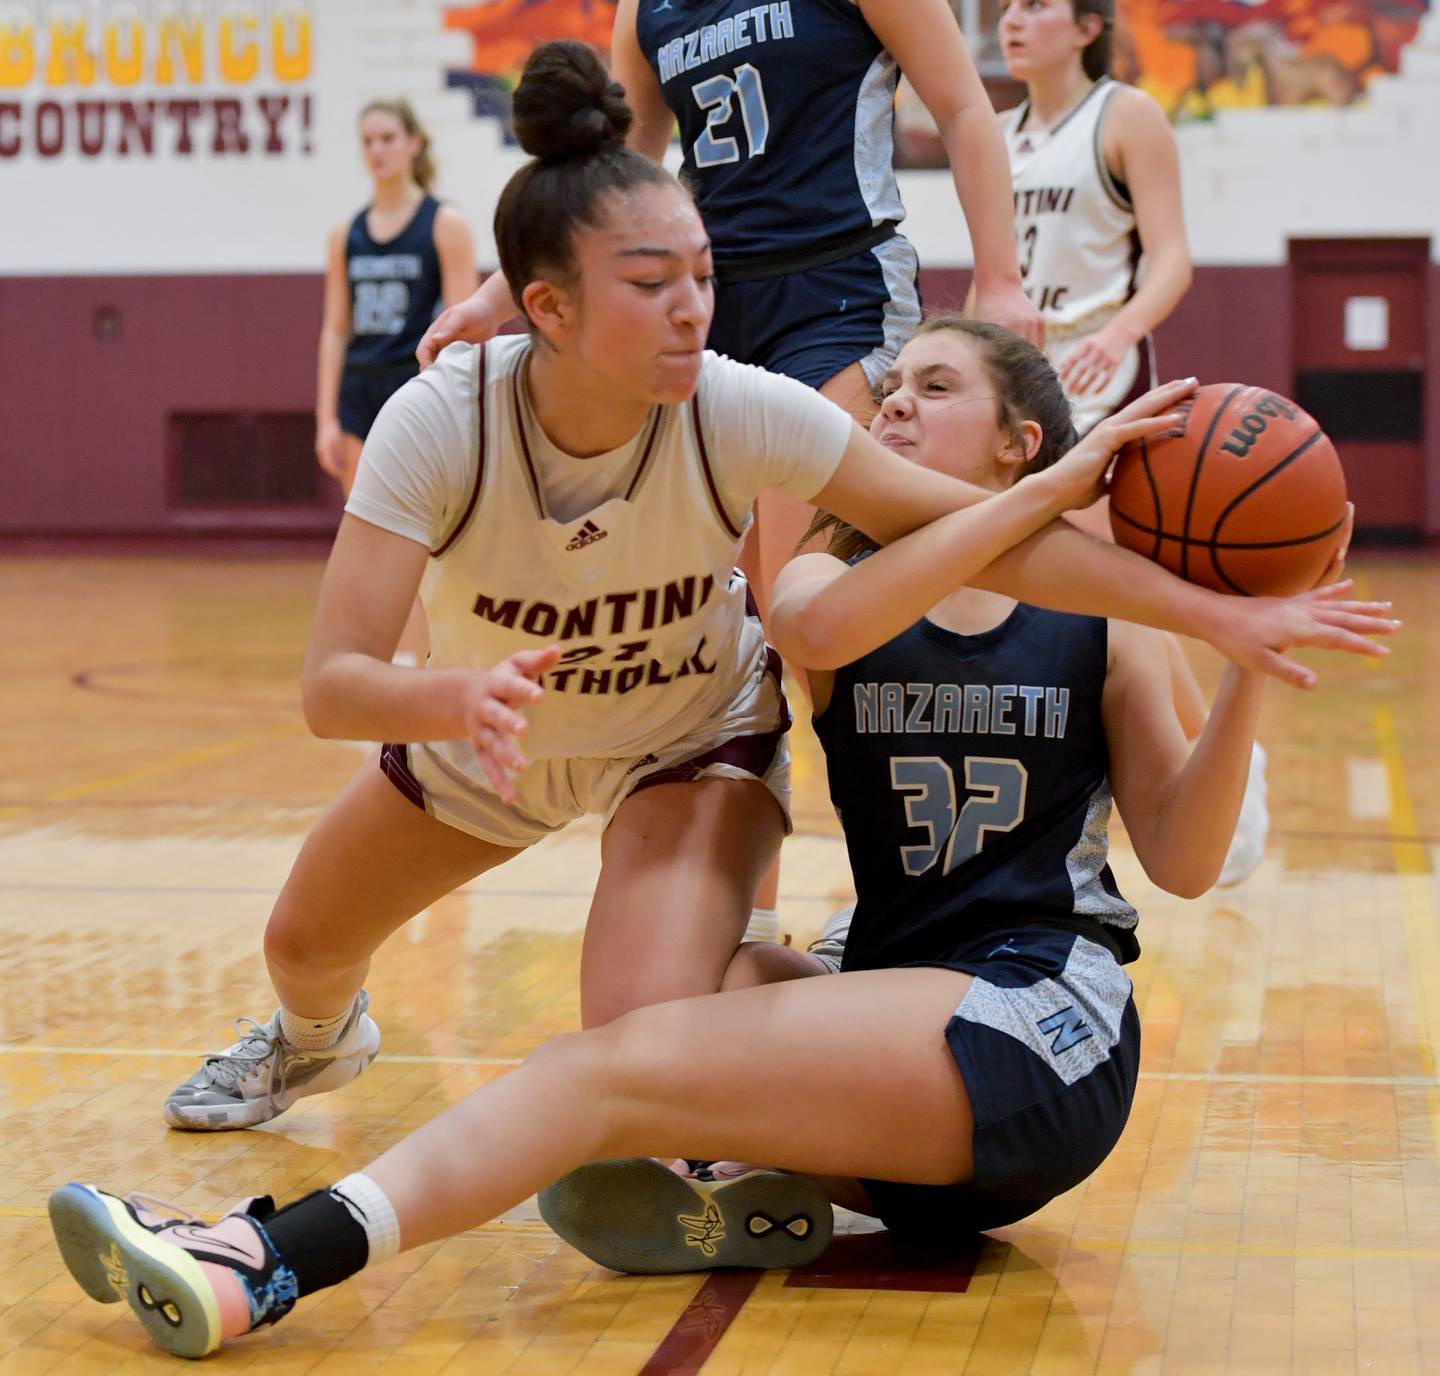 Montini's Alyssa Epps (21) and Nazareth's Stella Sakalas (32) struggle for control of the ball during the 2nd quarter of the semifinals at the Montini Catholic Christmas Tournament on Thursday, December 29, 2022.